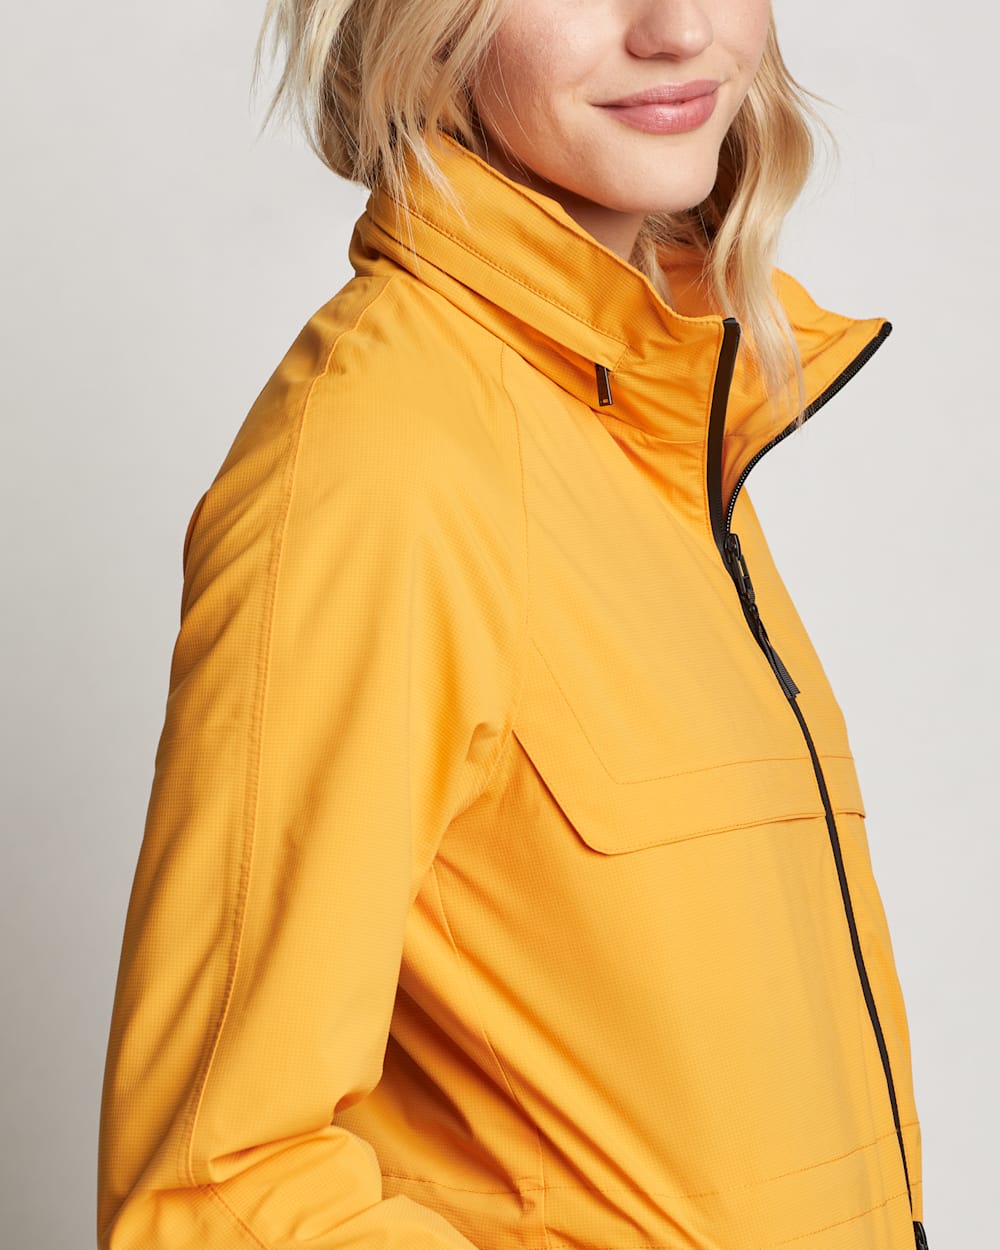 ALTERNATE VIEW OF WOMEN'S PARADISE RIPSTOP JACKET IN SUNSET image number 2